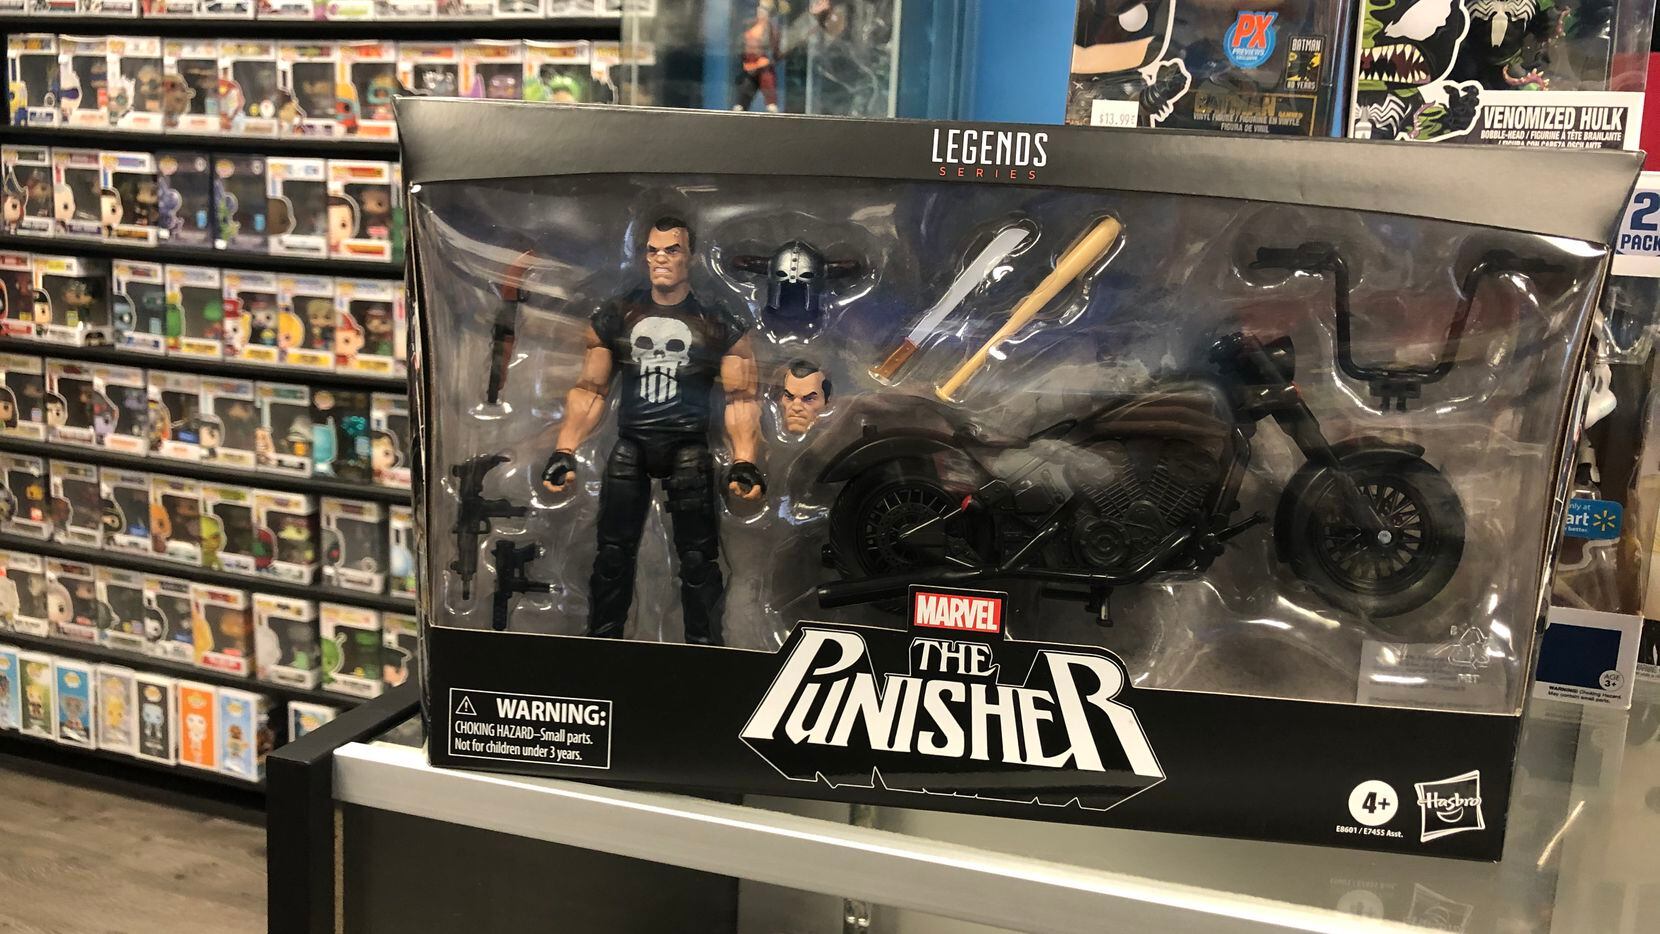 The logo for the Punisher, a Marvel Comics character, has been reclaimed by so-called...